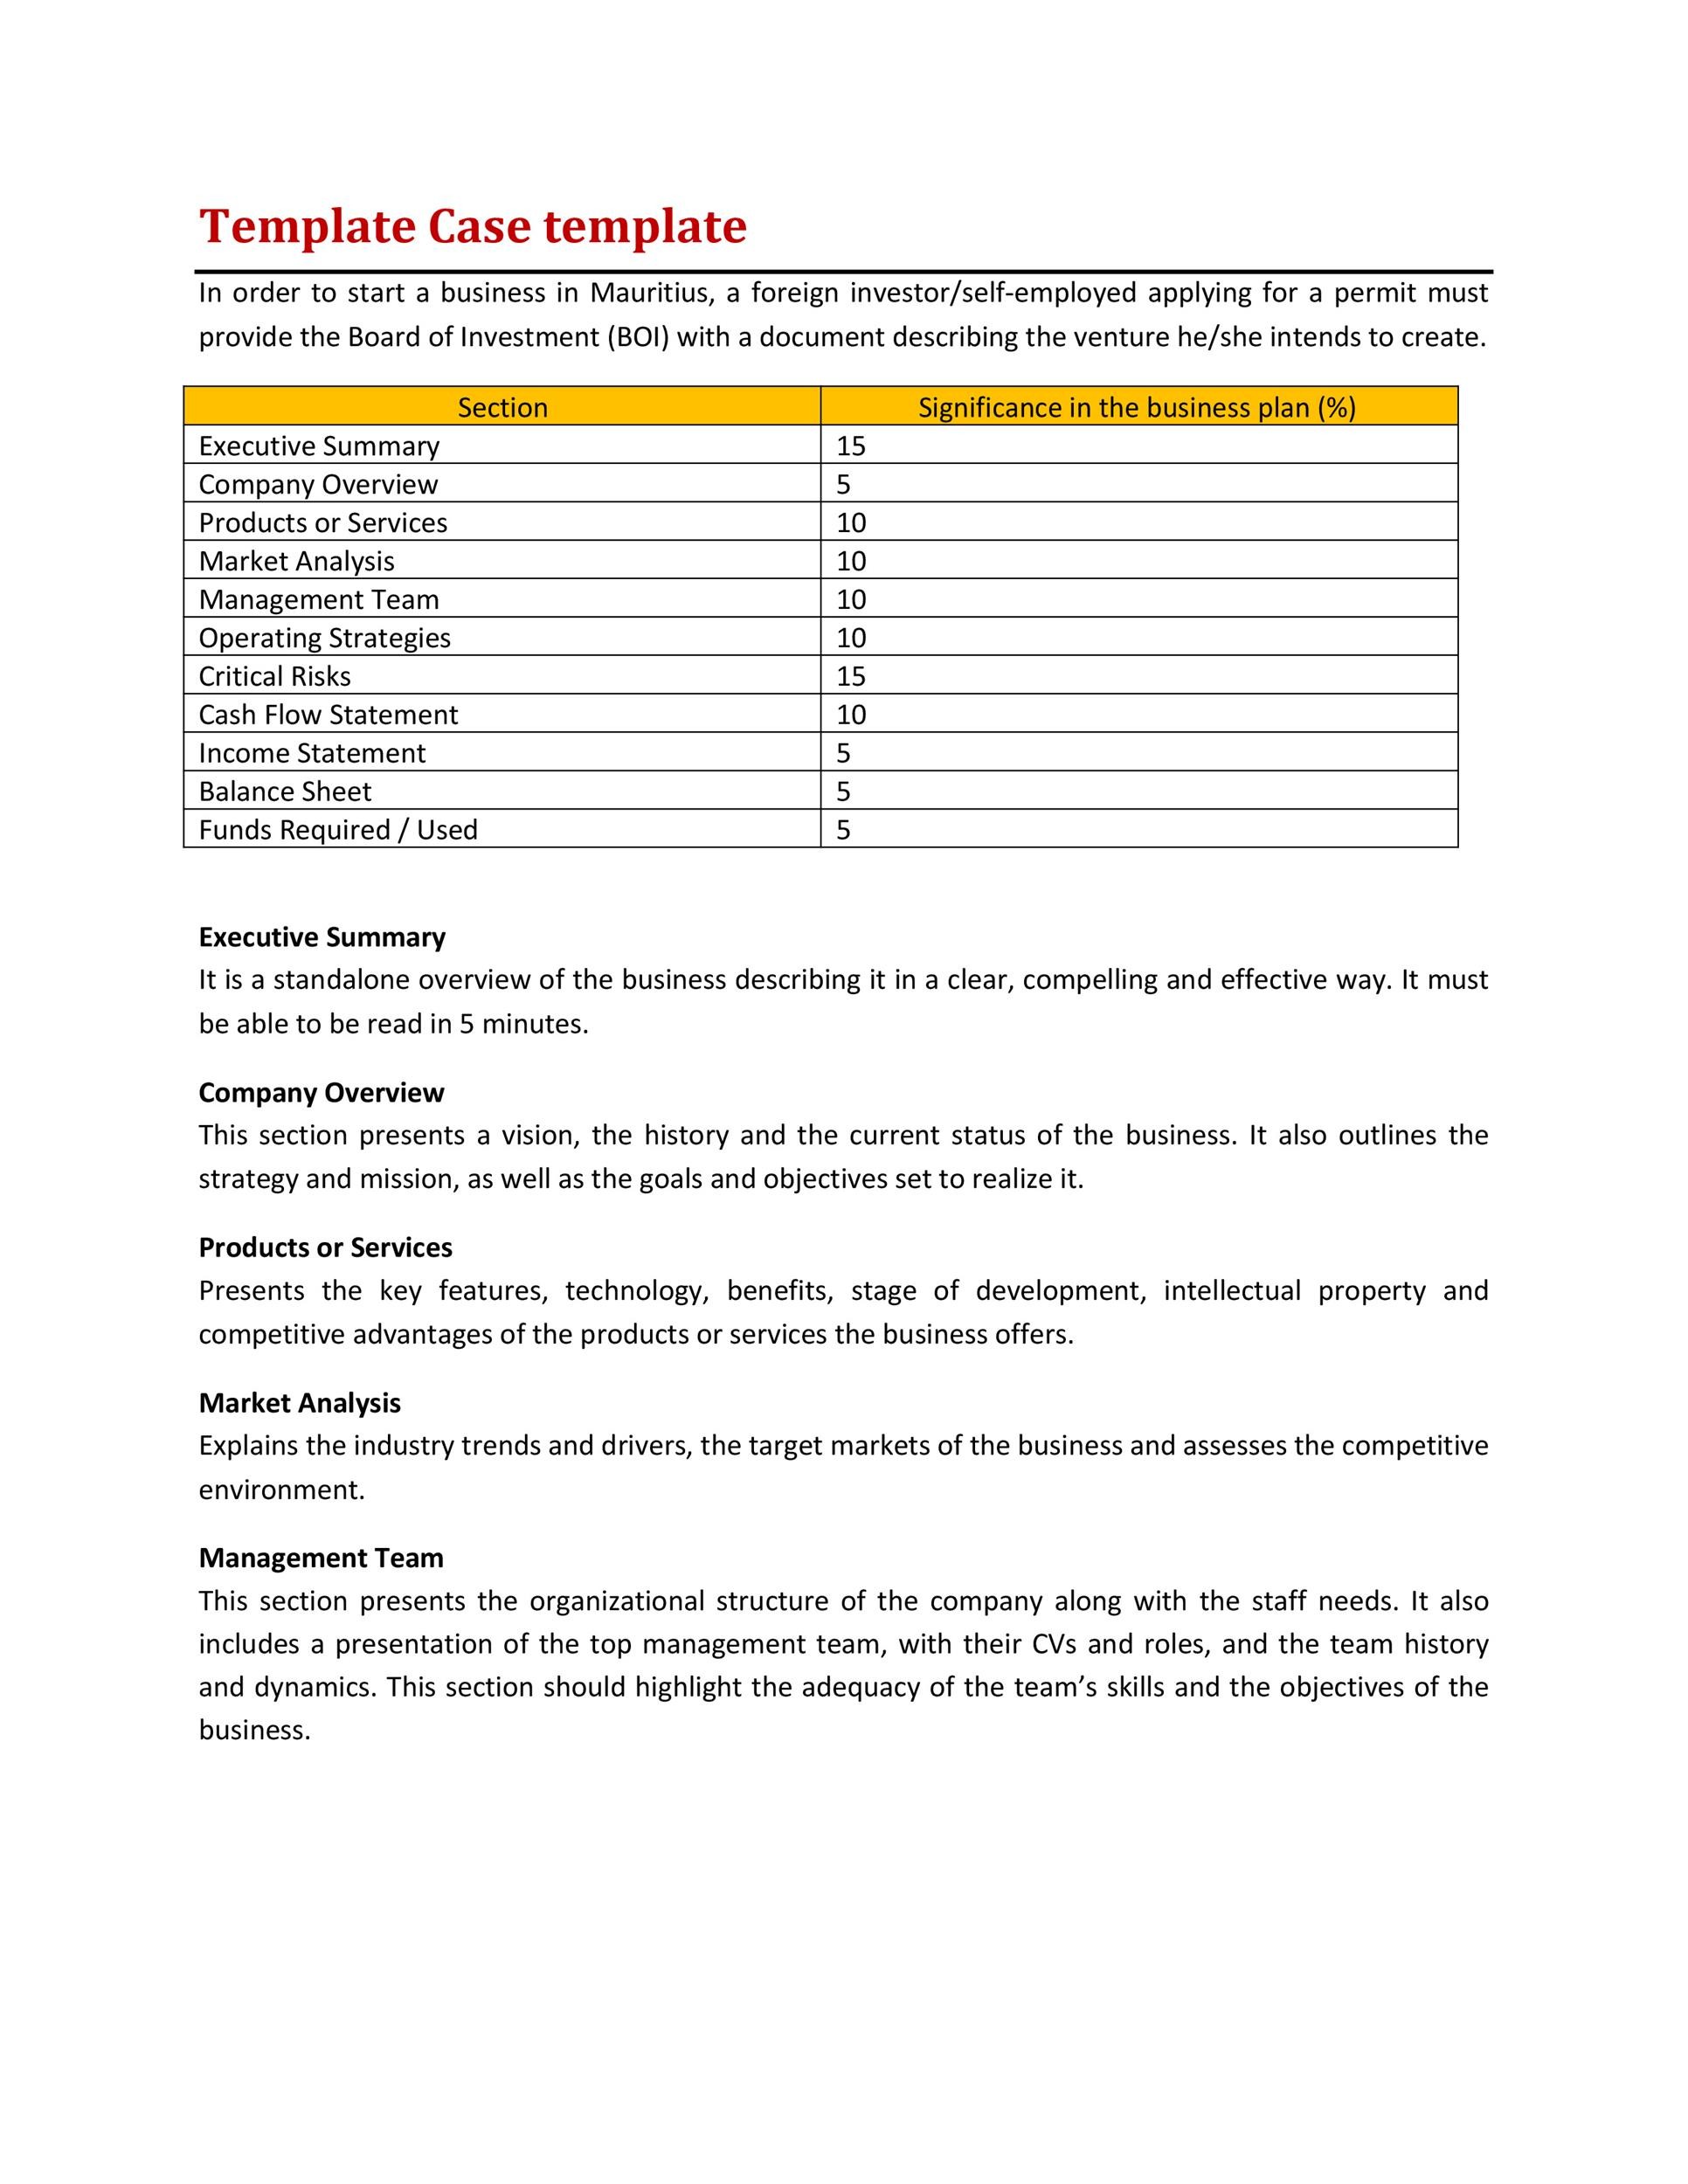 business case report sample